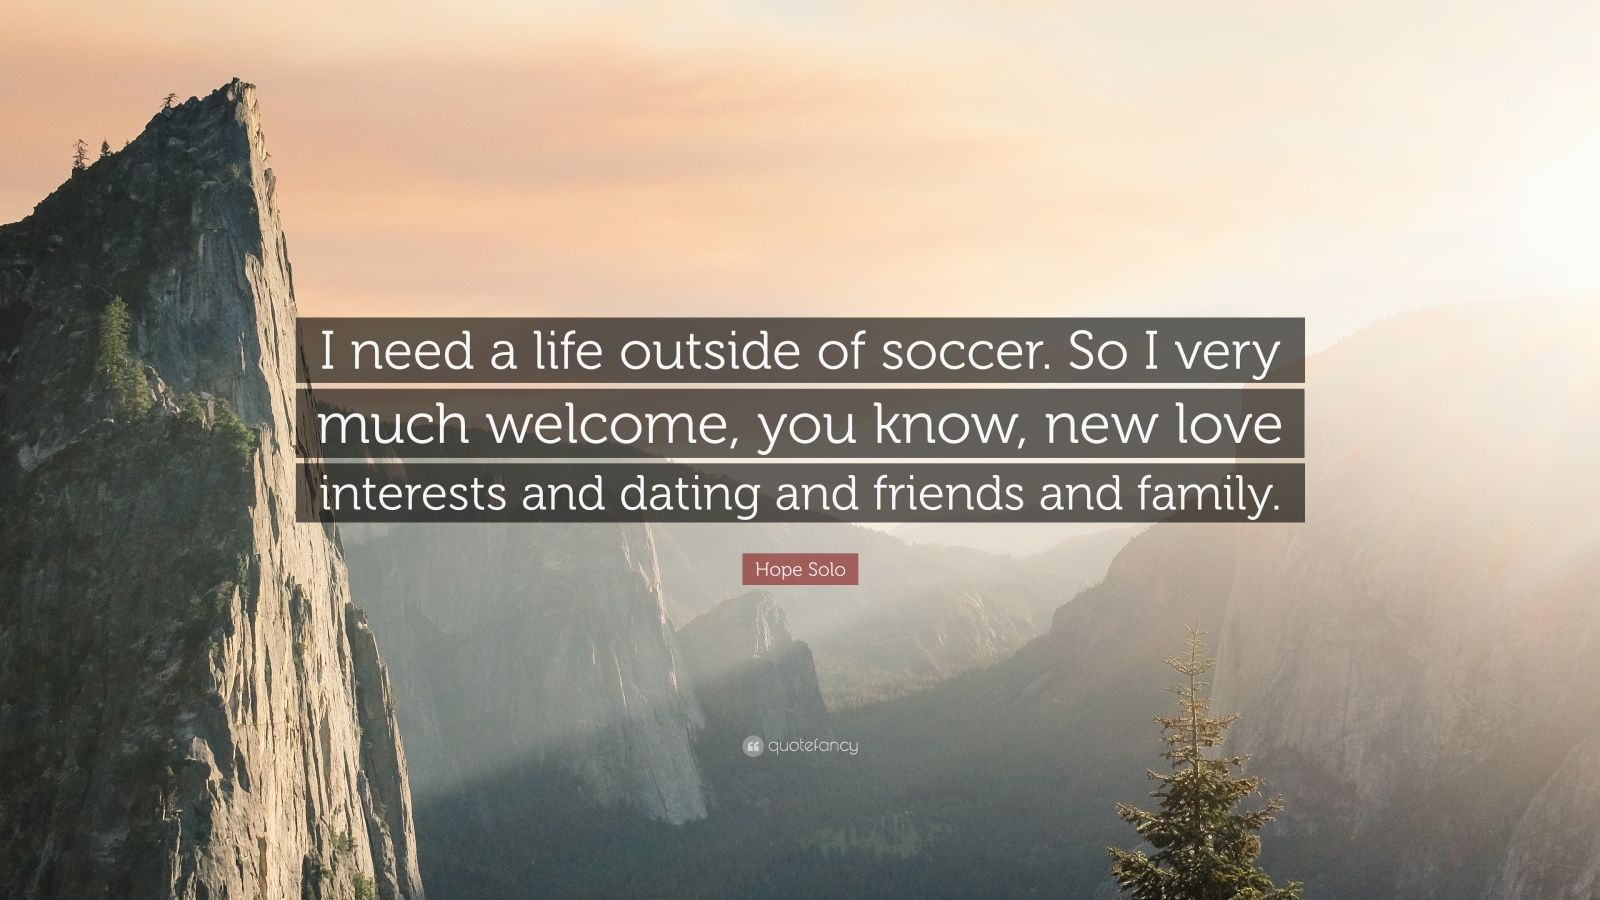 Hope Solo Quote “I need a life outside of soccer So I very